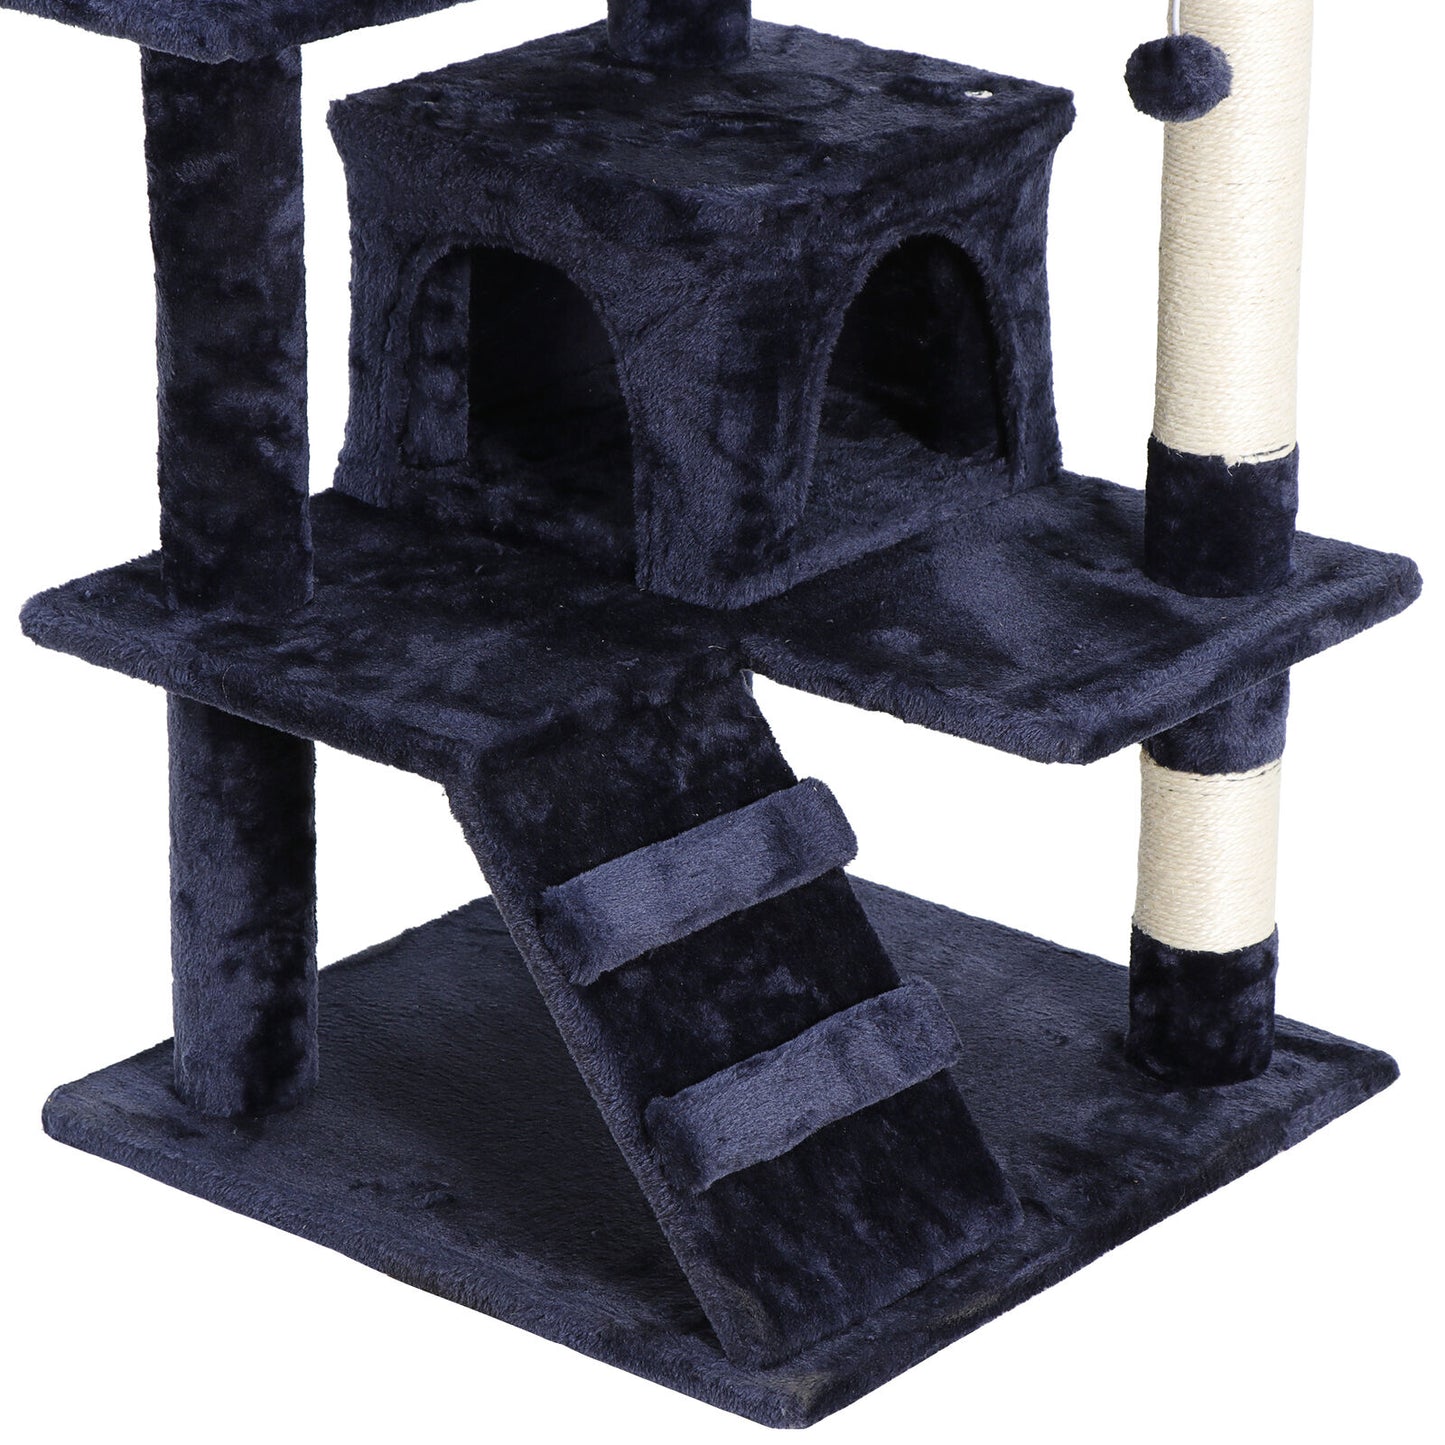 53" Blue Cat Tree Tower Activity Center Large Playing House Condo For Rest